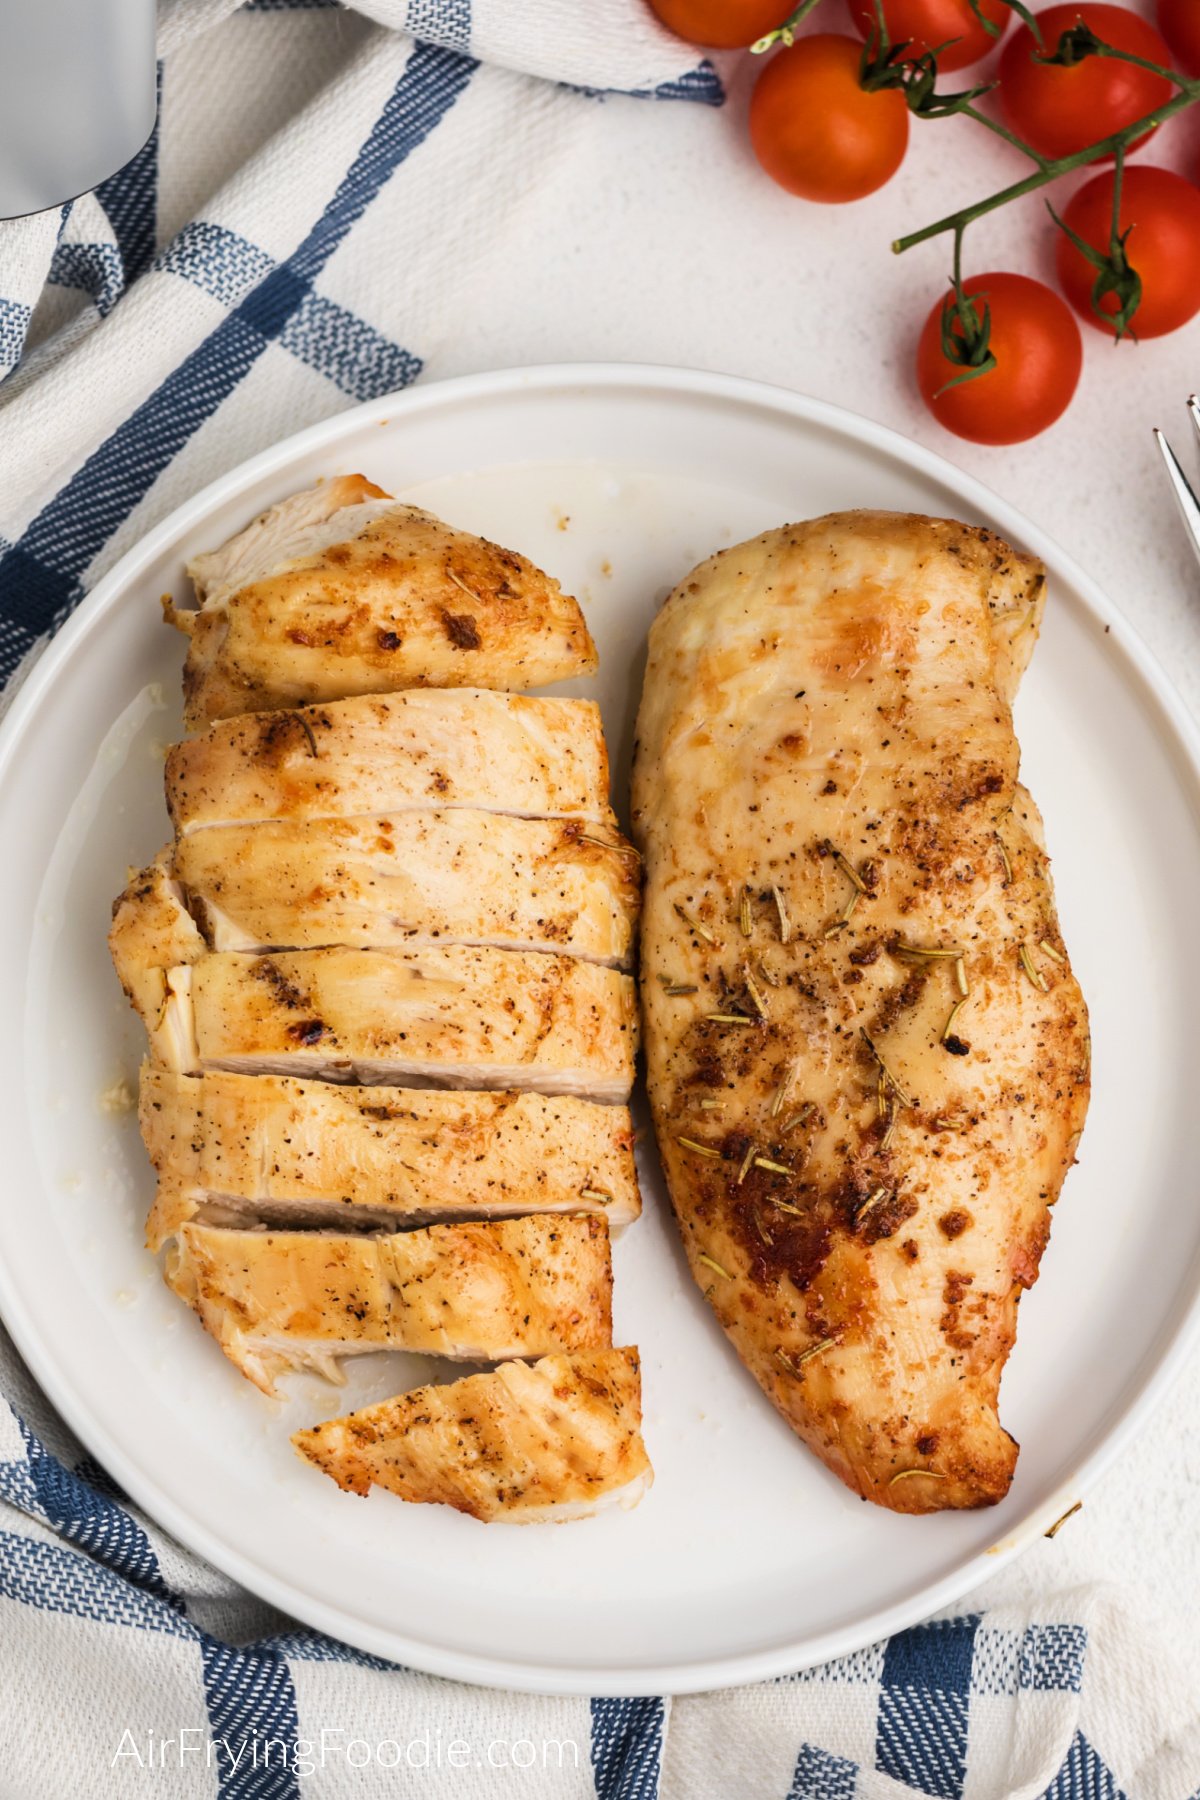 Seasoned, sliced, and whole grilled chicken breast made in the air fryer and served on a white plate.